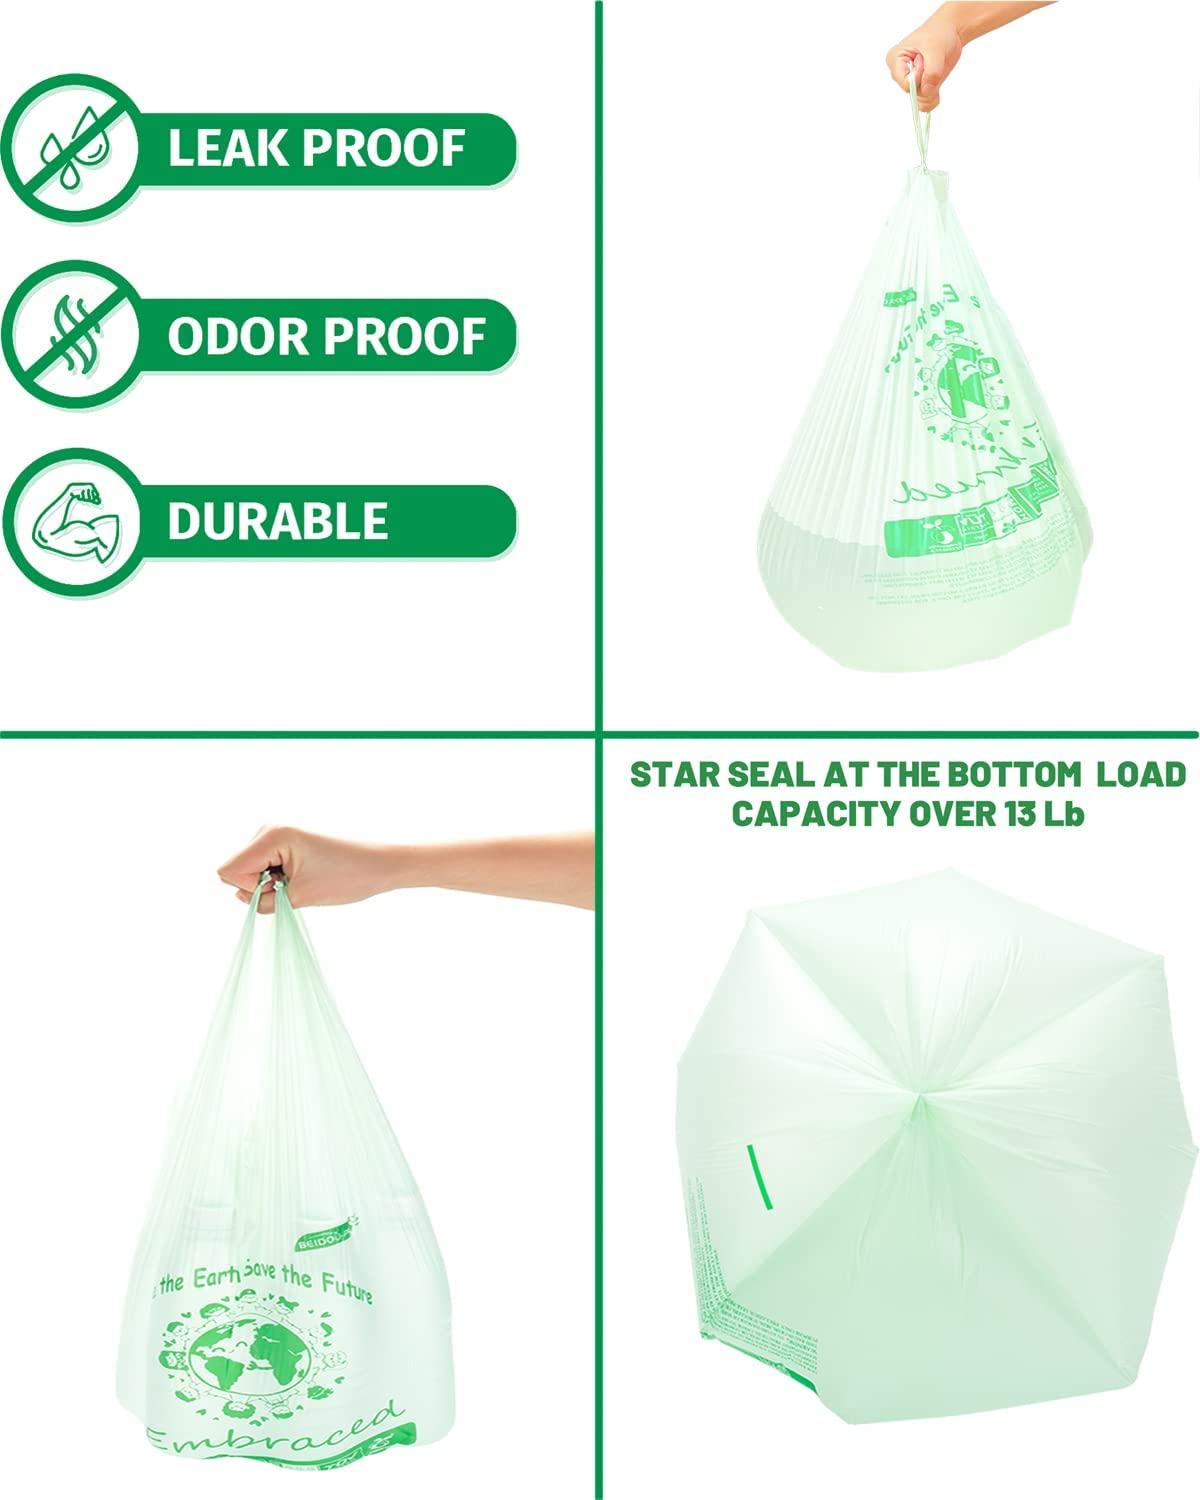 BEIDOU-PAC 40-45 Gallon Lawn & Leaf Trash Bags, 125 Count Bulk, Heavy Duty  Clear Plastic Recycling Bags, Multi-purpose Garbage Bags for Home